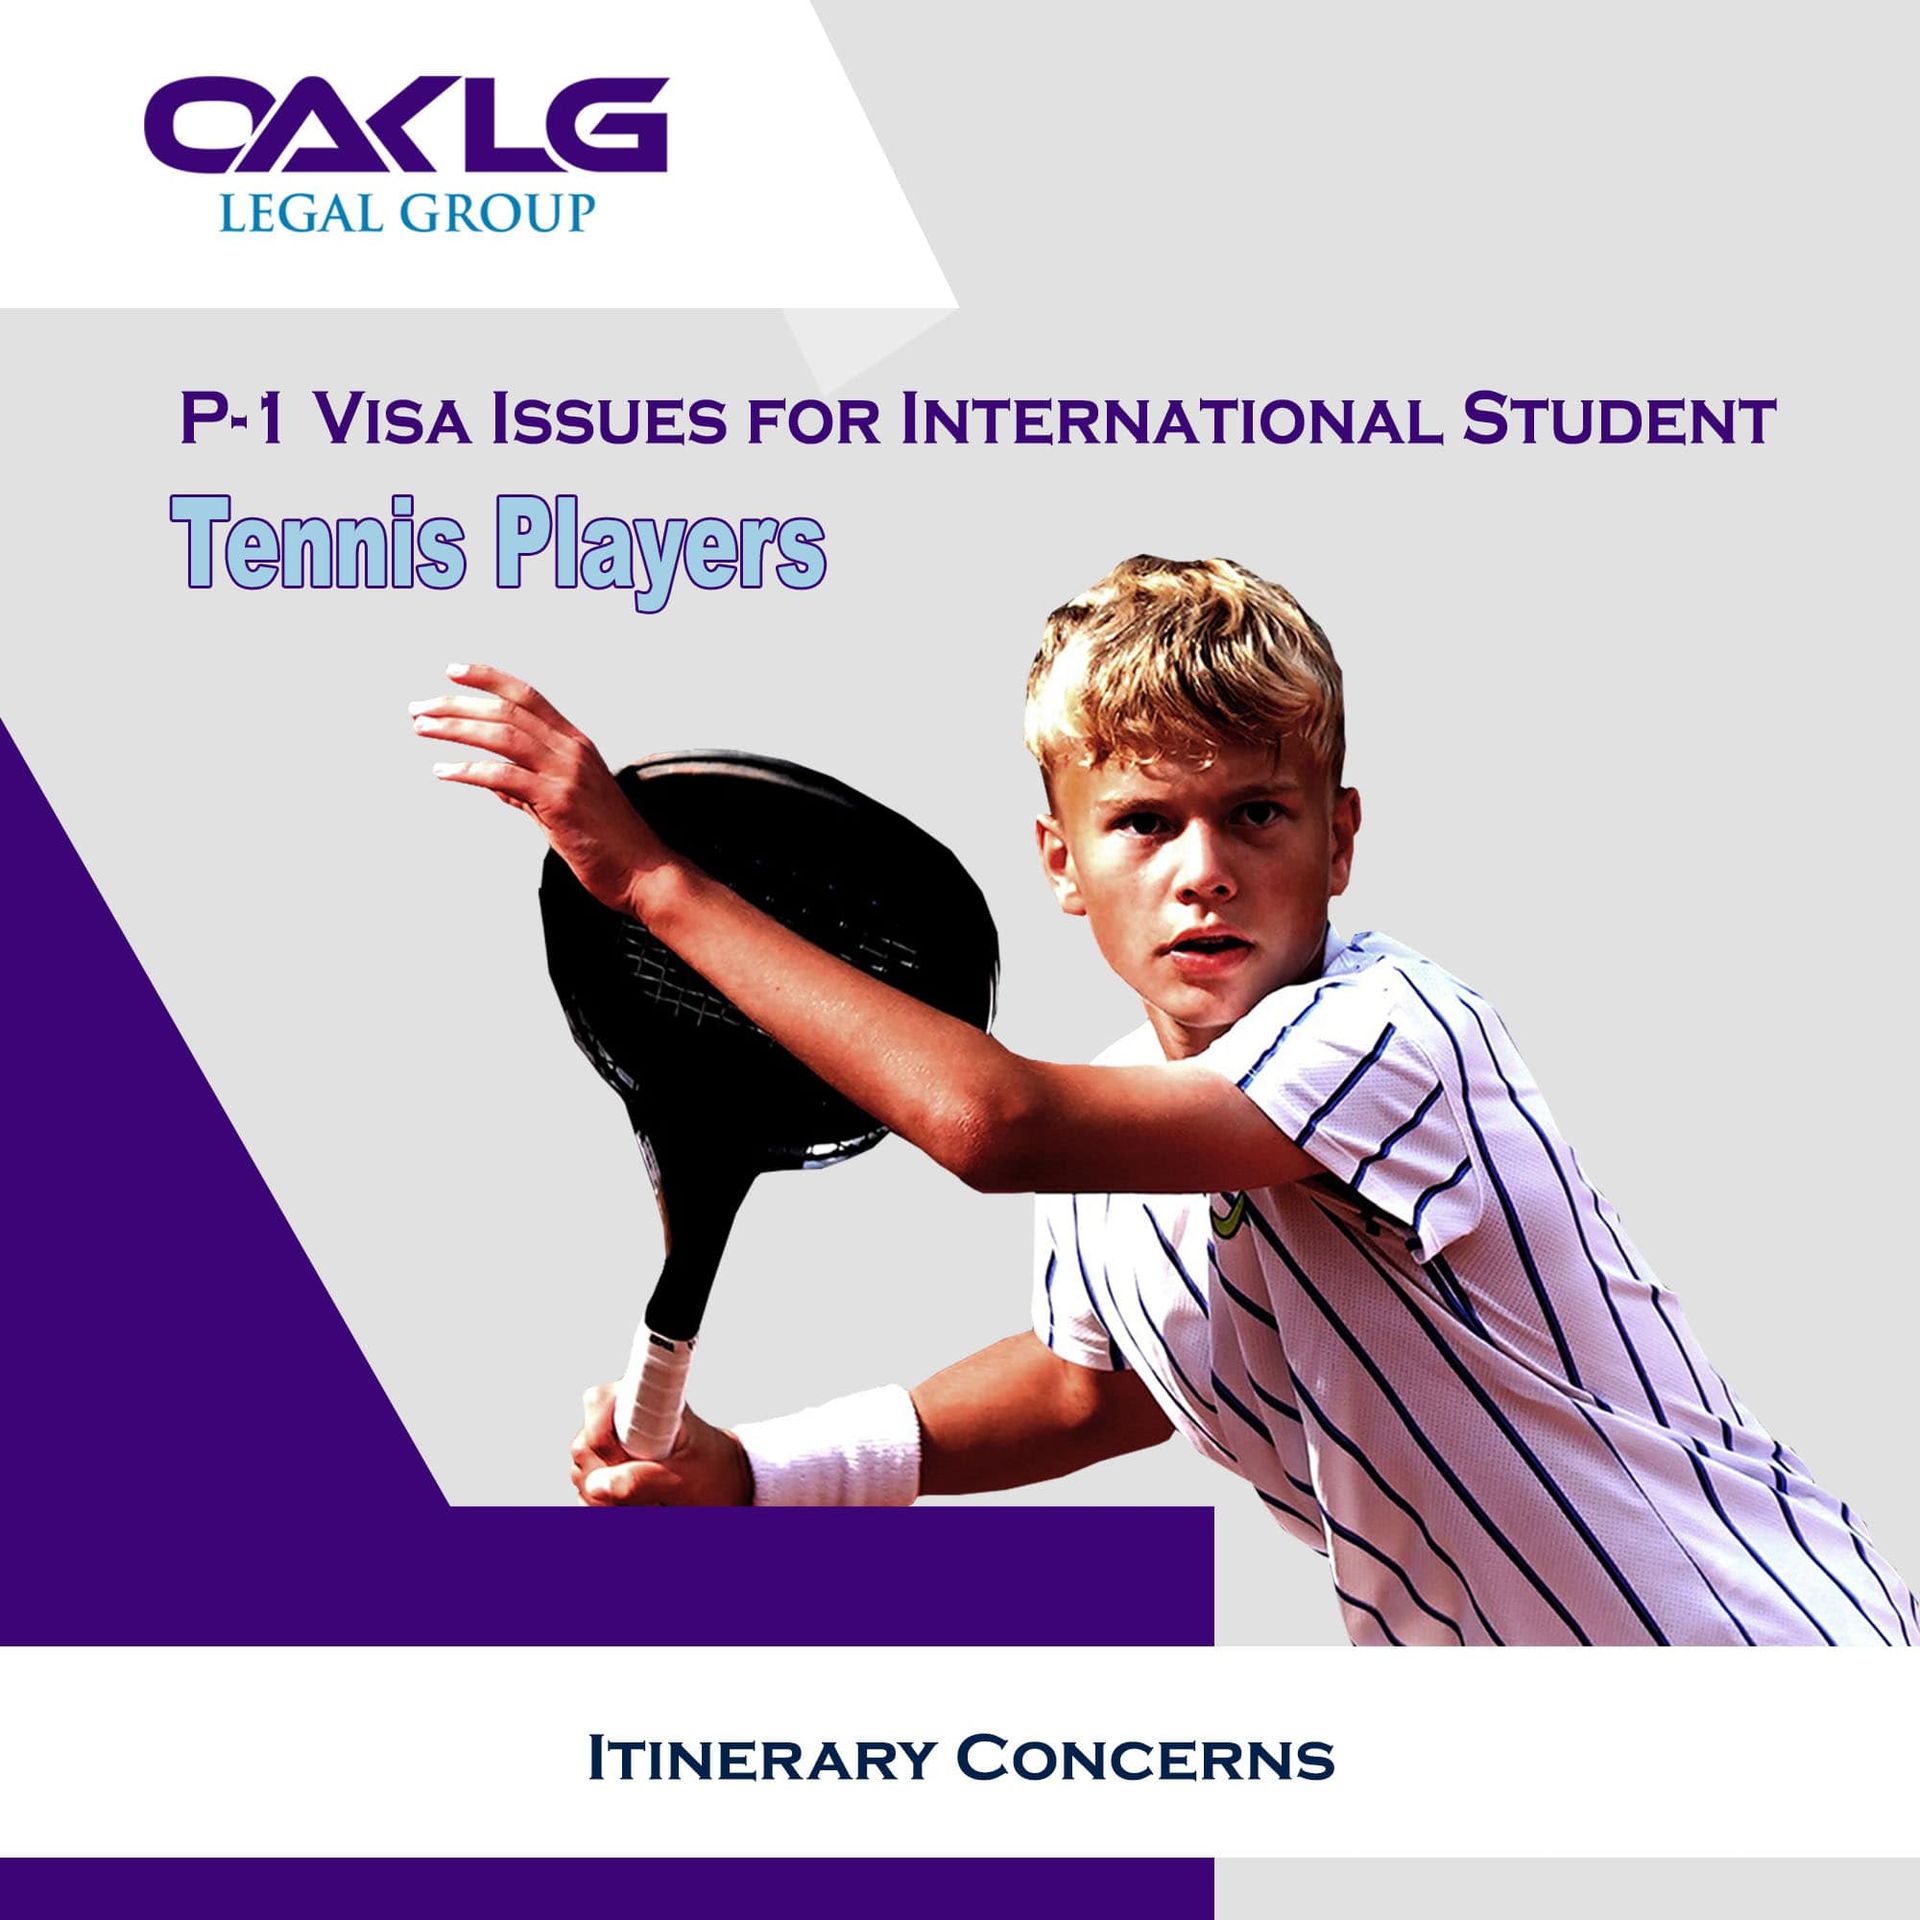 P-1 Visa Issues for International Student Tennis Players